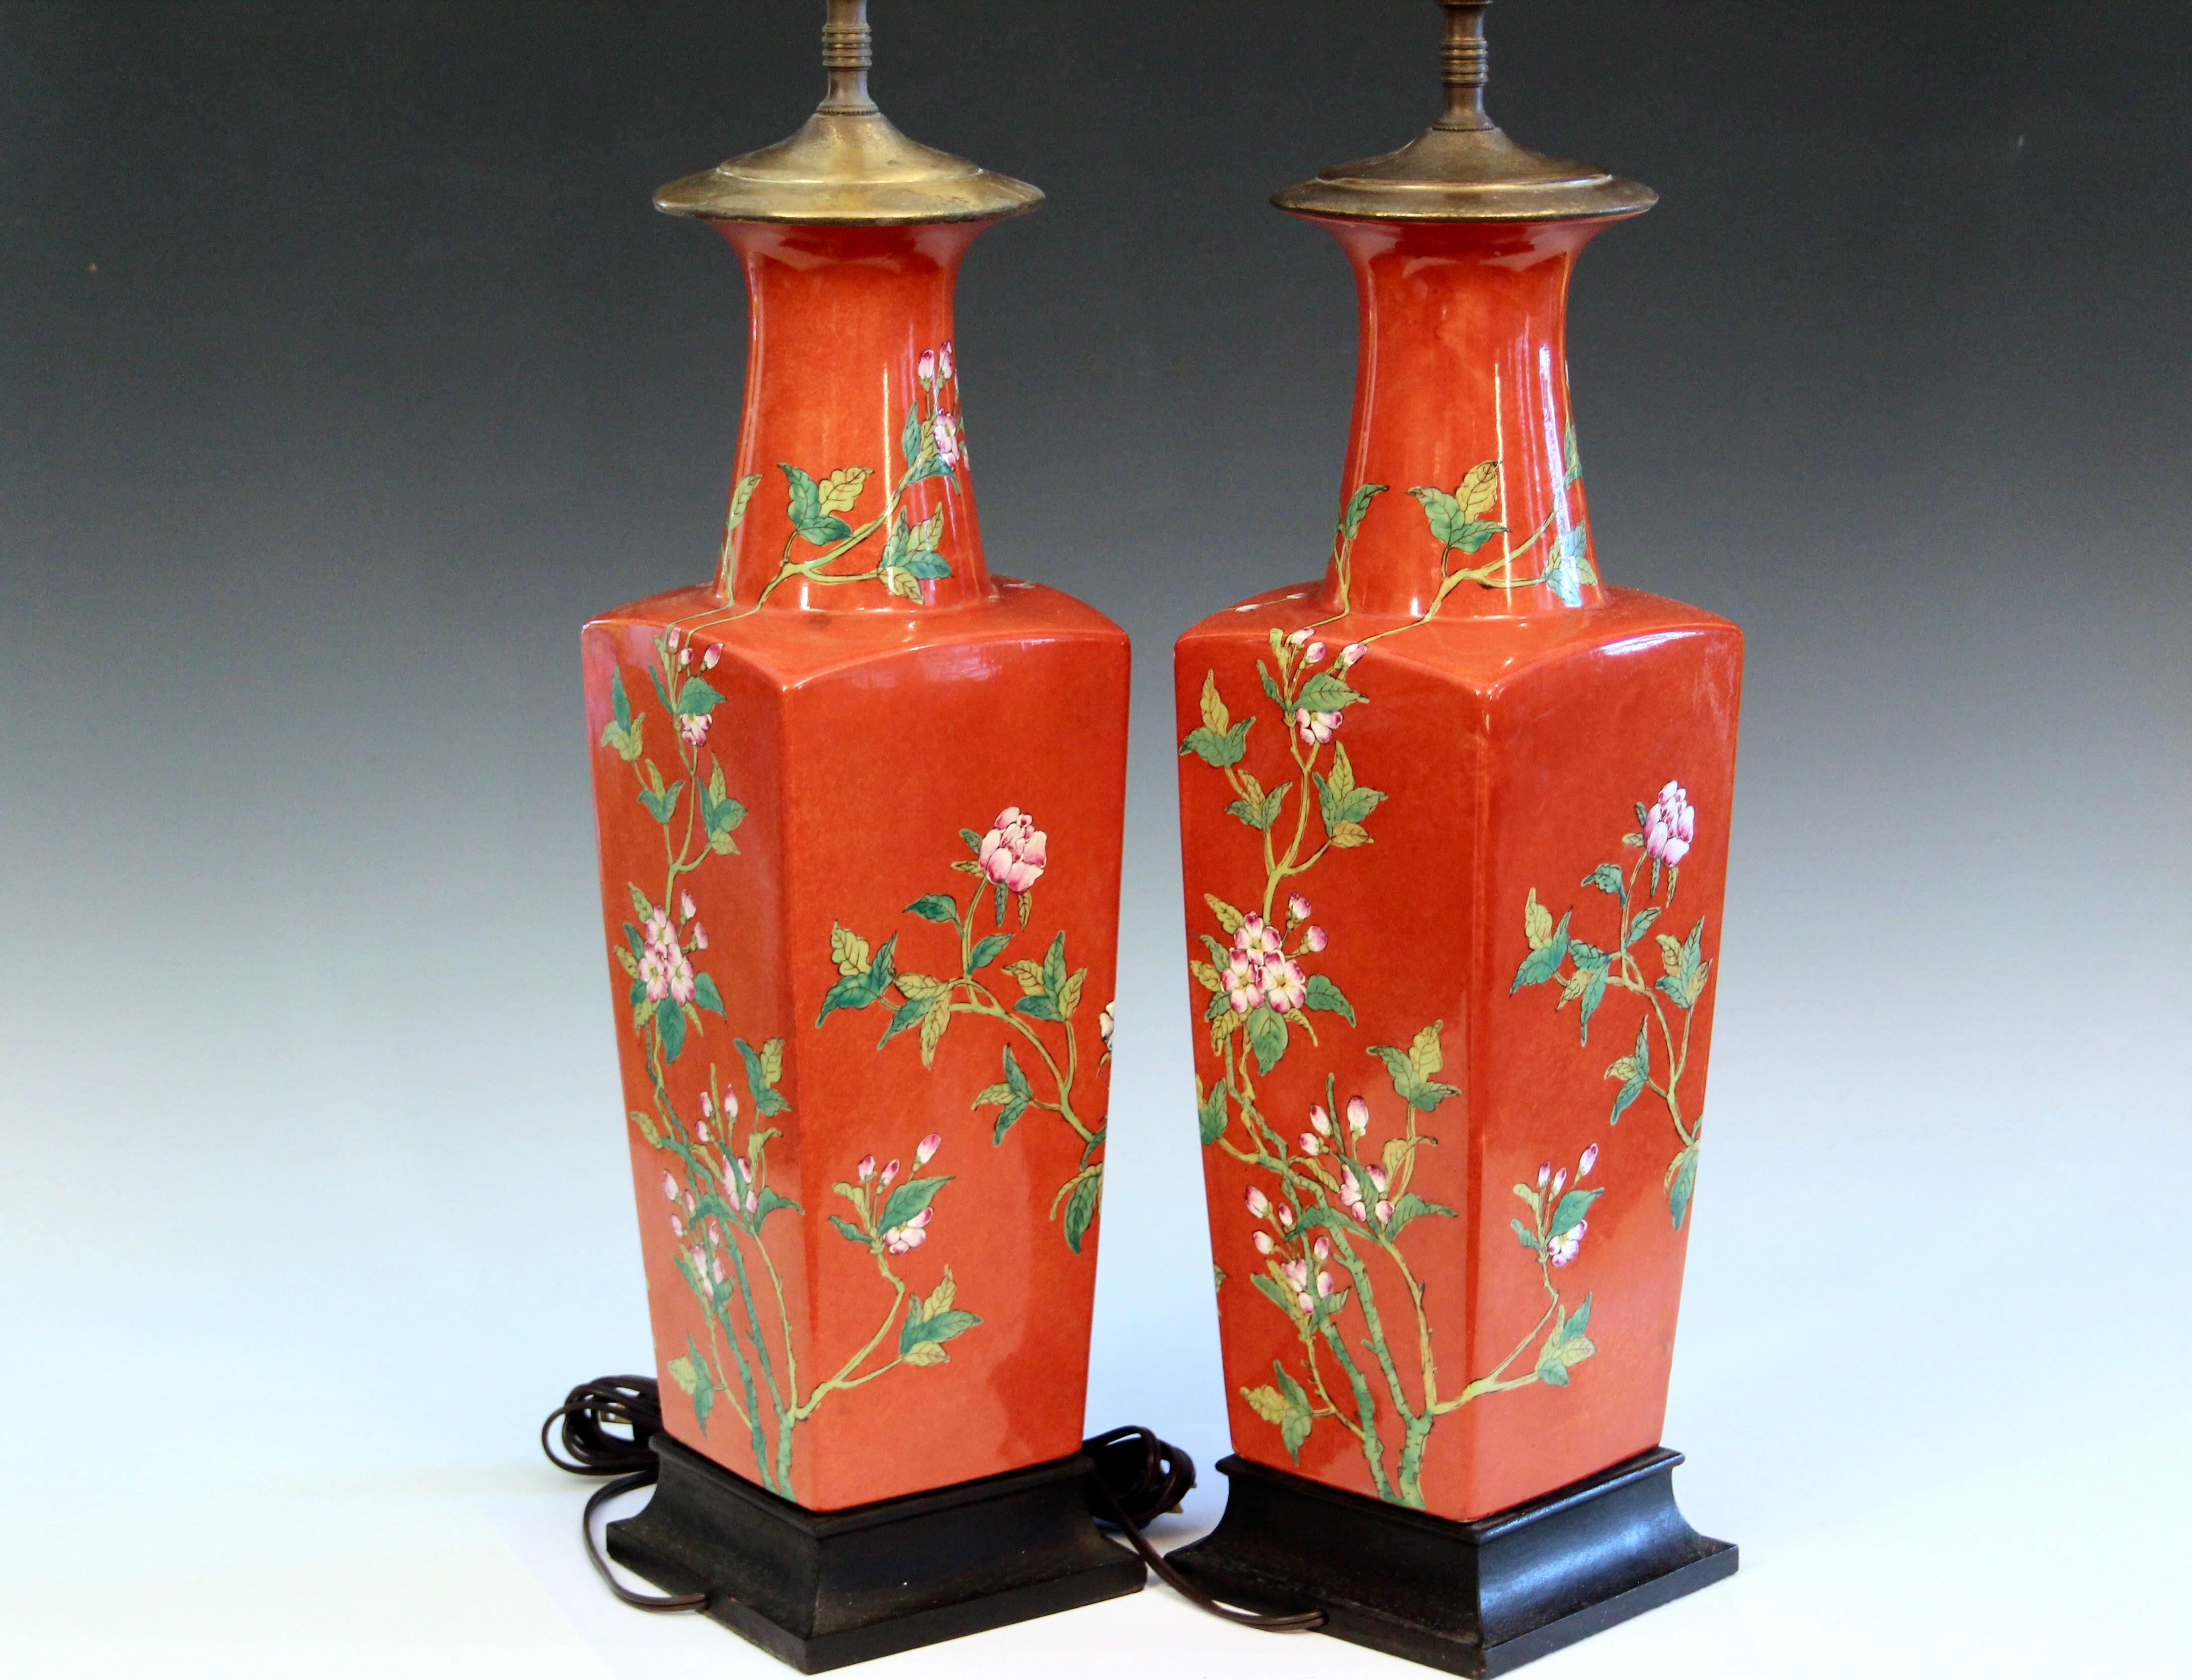 Pair vintage Chinese porcelain chinoiserie square form bottle lamps richly decorated with peonies on a cinnamon red ground, circa 1970's. Beautiful color, nice quality painting. 3-way switches. New sockets and cords. Shades not included. 36